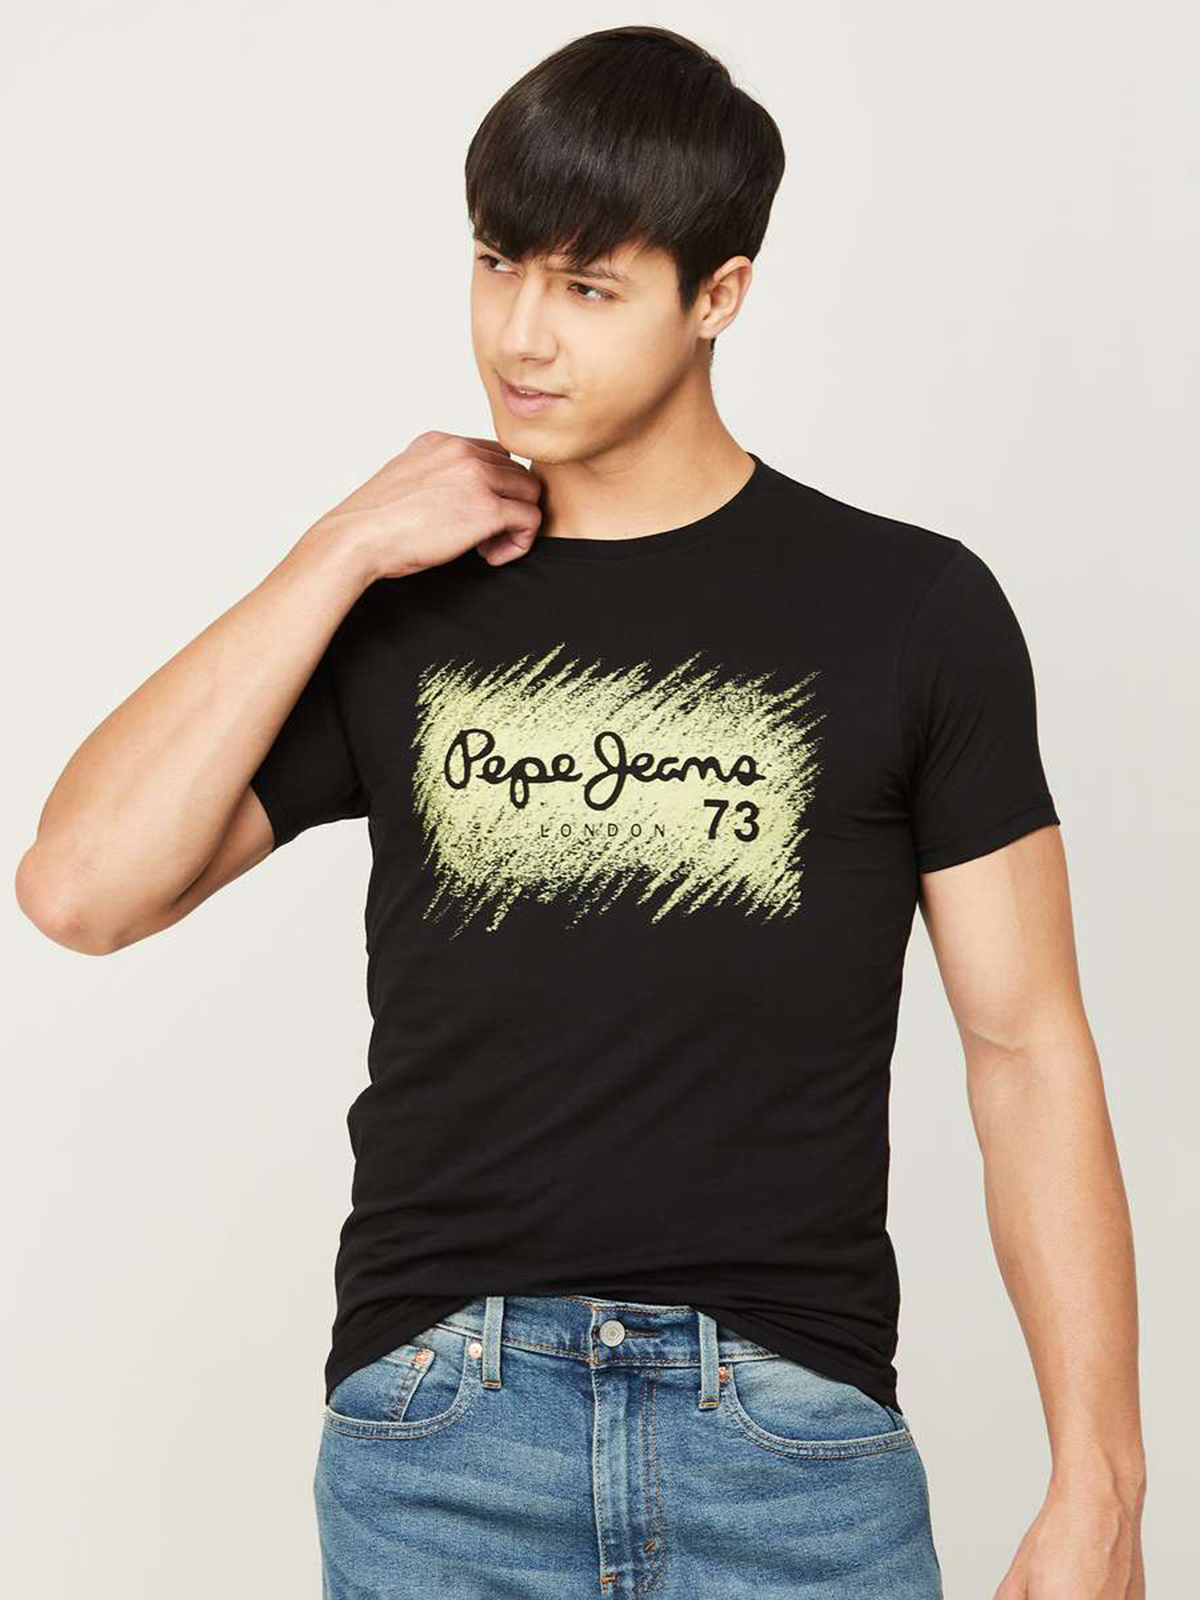 Pepe Jeans Typography Men Round Neck Black T-Shirt - Buy Pepe Jeans  Typography Men Round Neck Black T-Shirt Online at Best Prices in India |  Flipkart.com